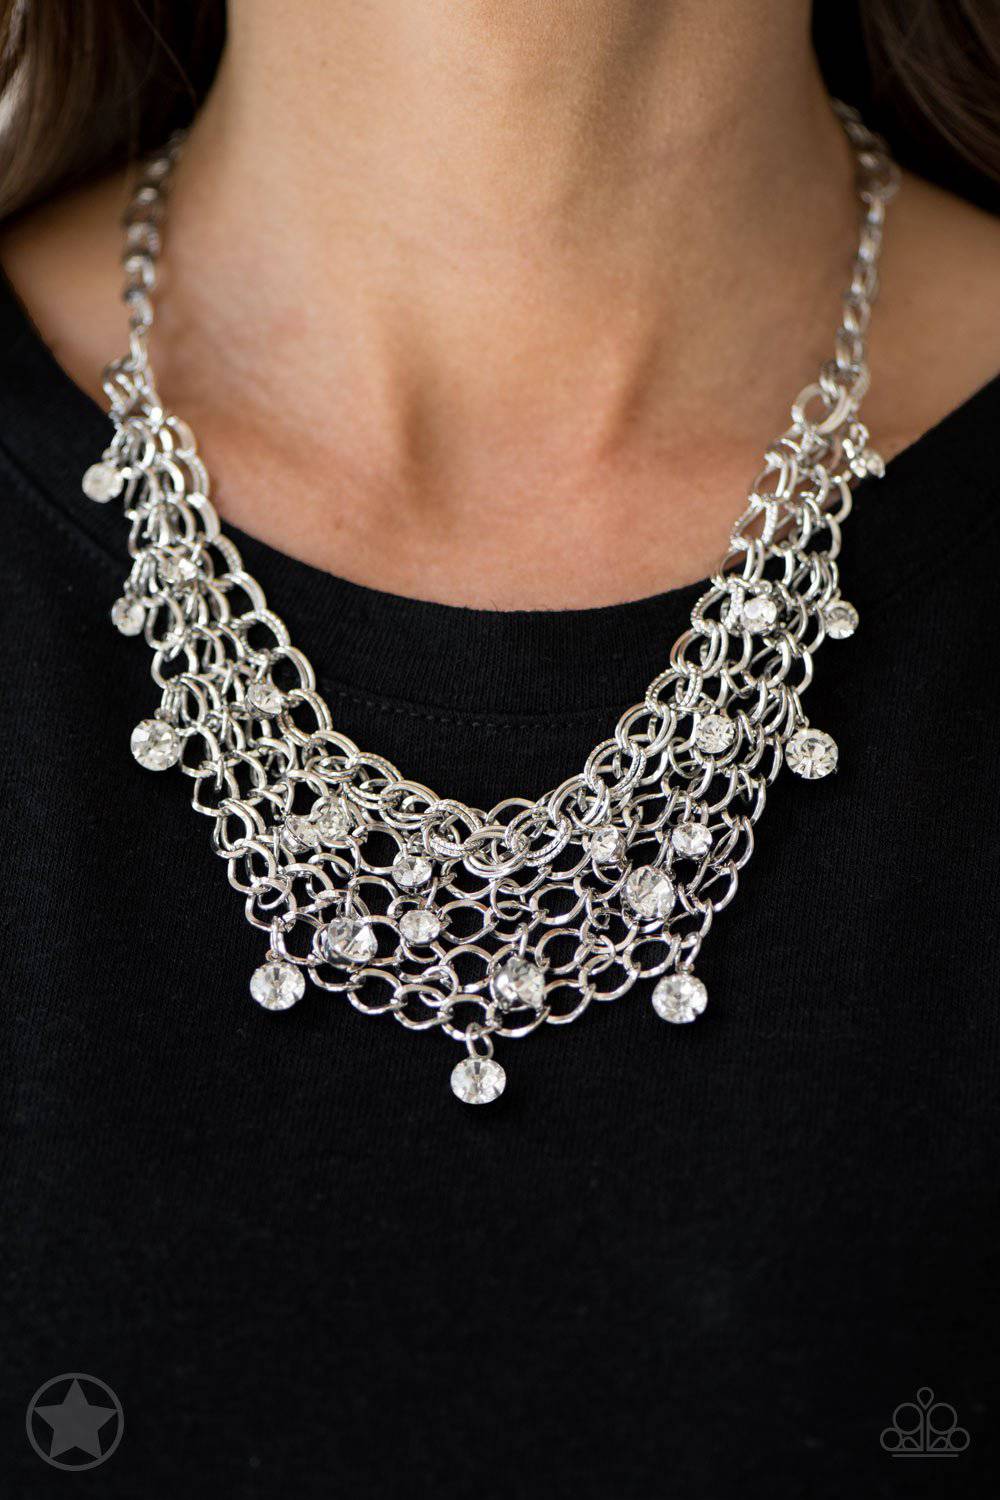 Fishing for Compliments - Silver and Rhinestone Necklace - Paparazzi Accessories - GlaMarous Titi Jewels